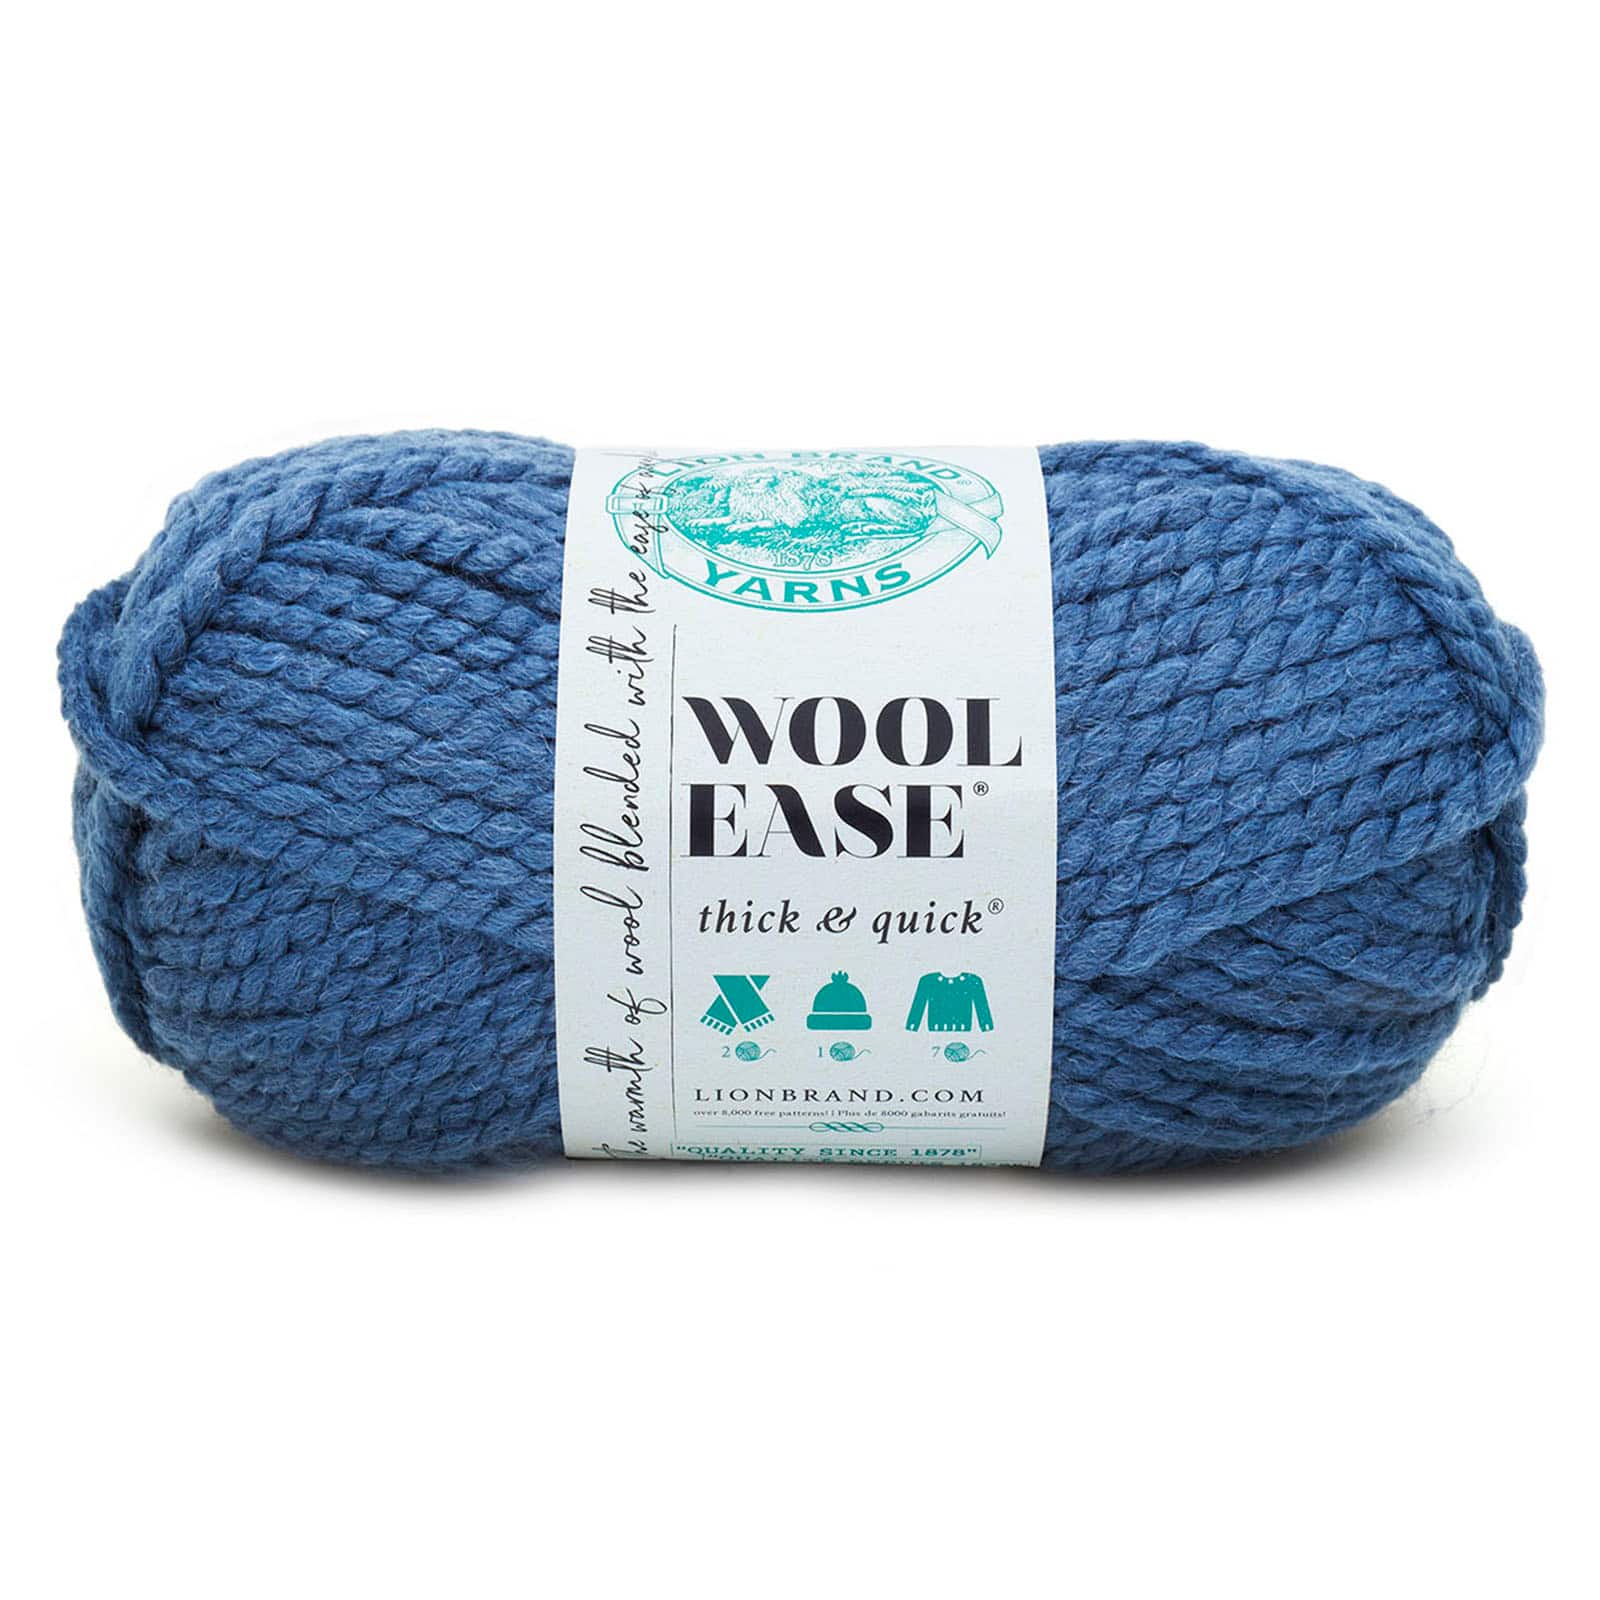 Lion Brand Wool-Ease Thick & Quick Yarn-Harvest, 1 count - Jay C